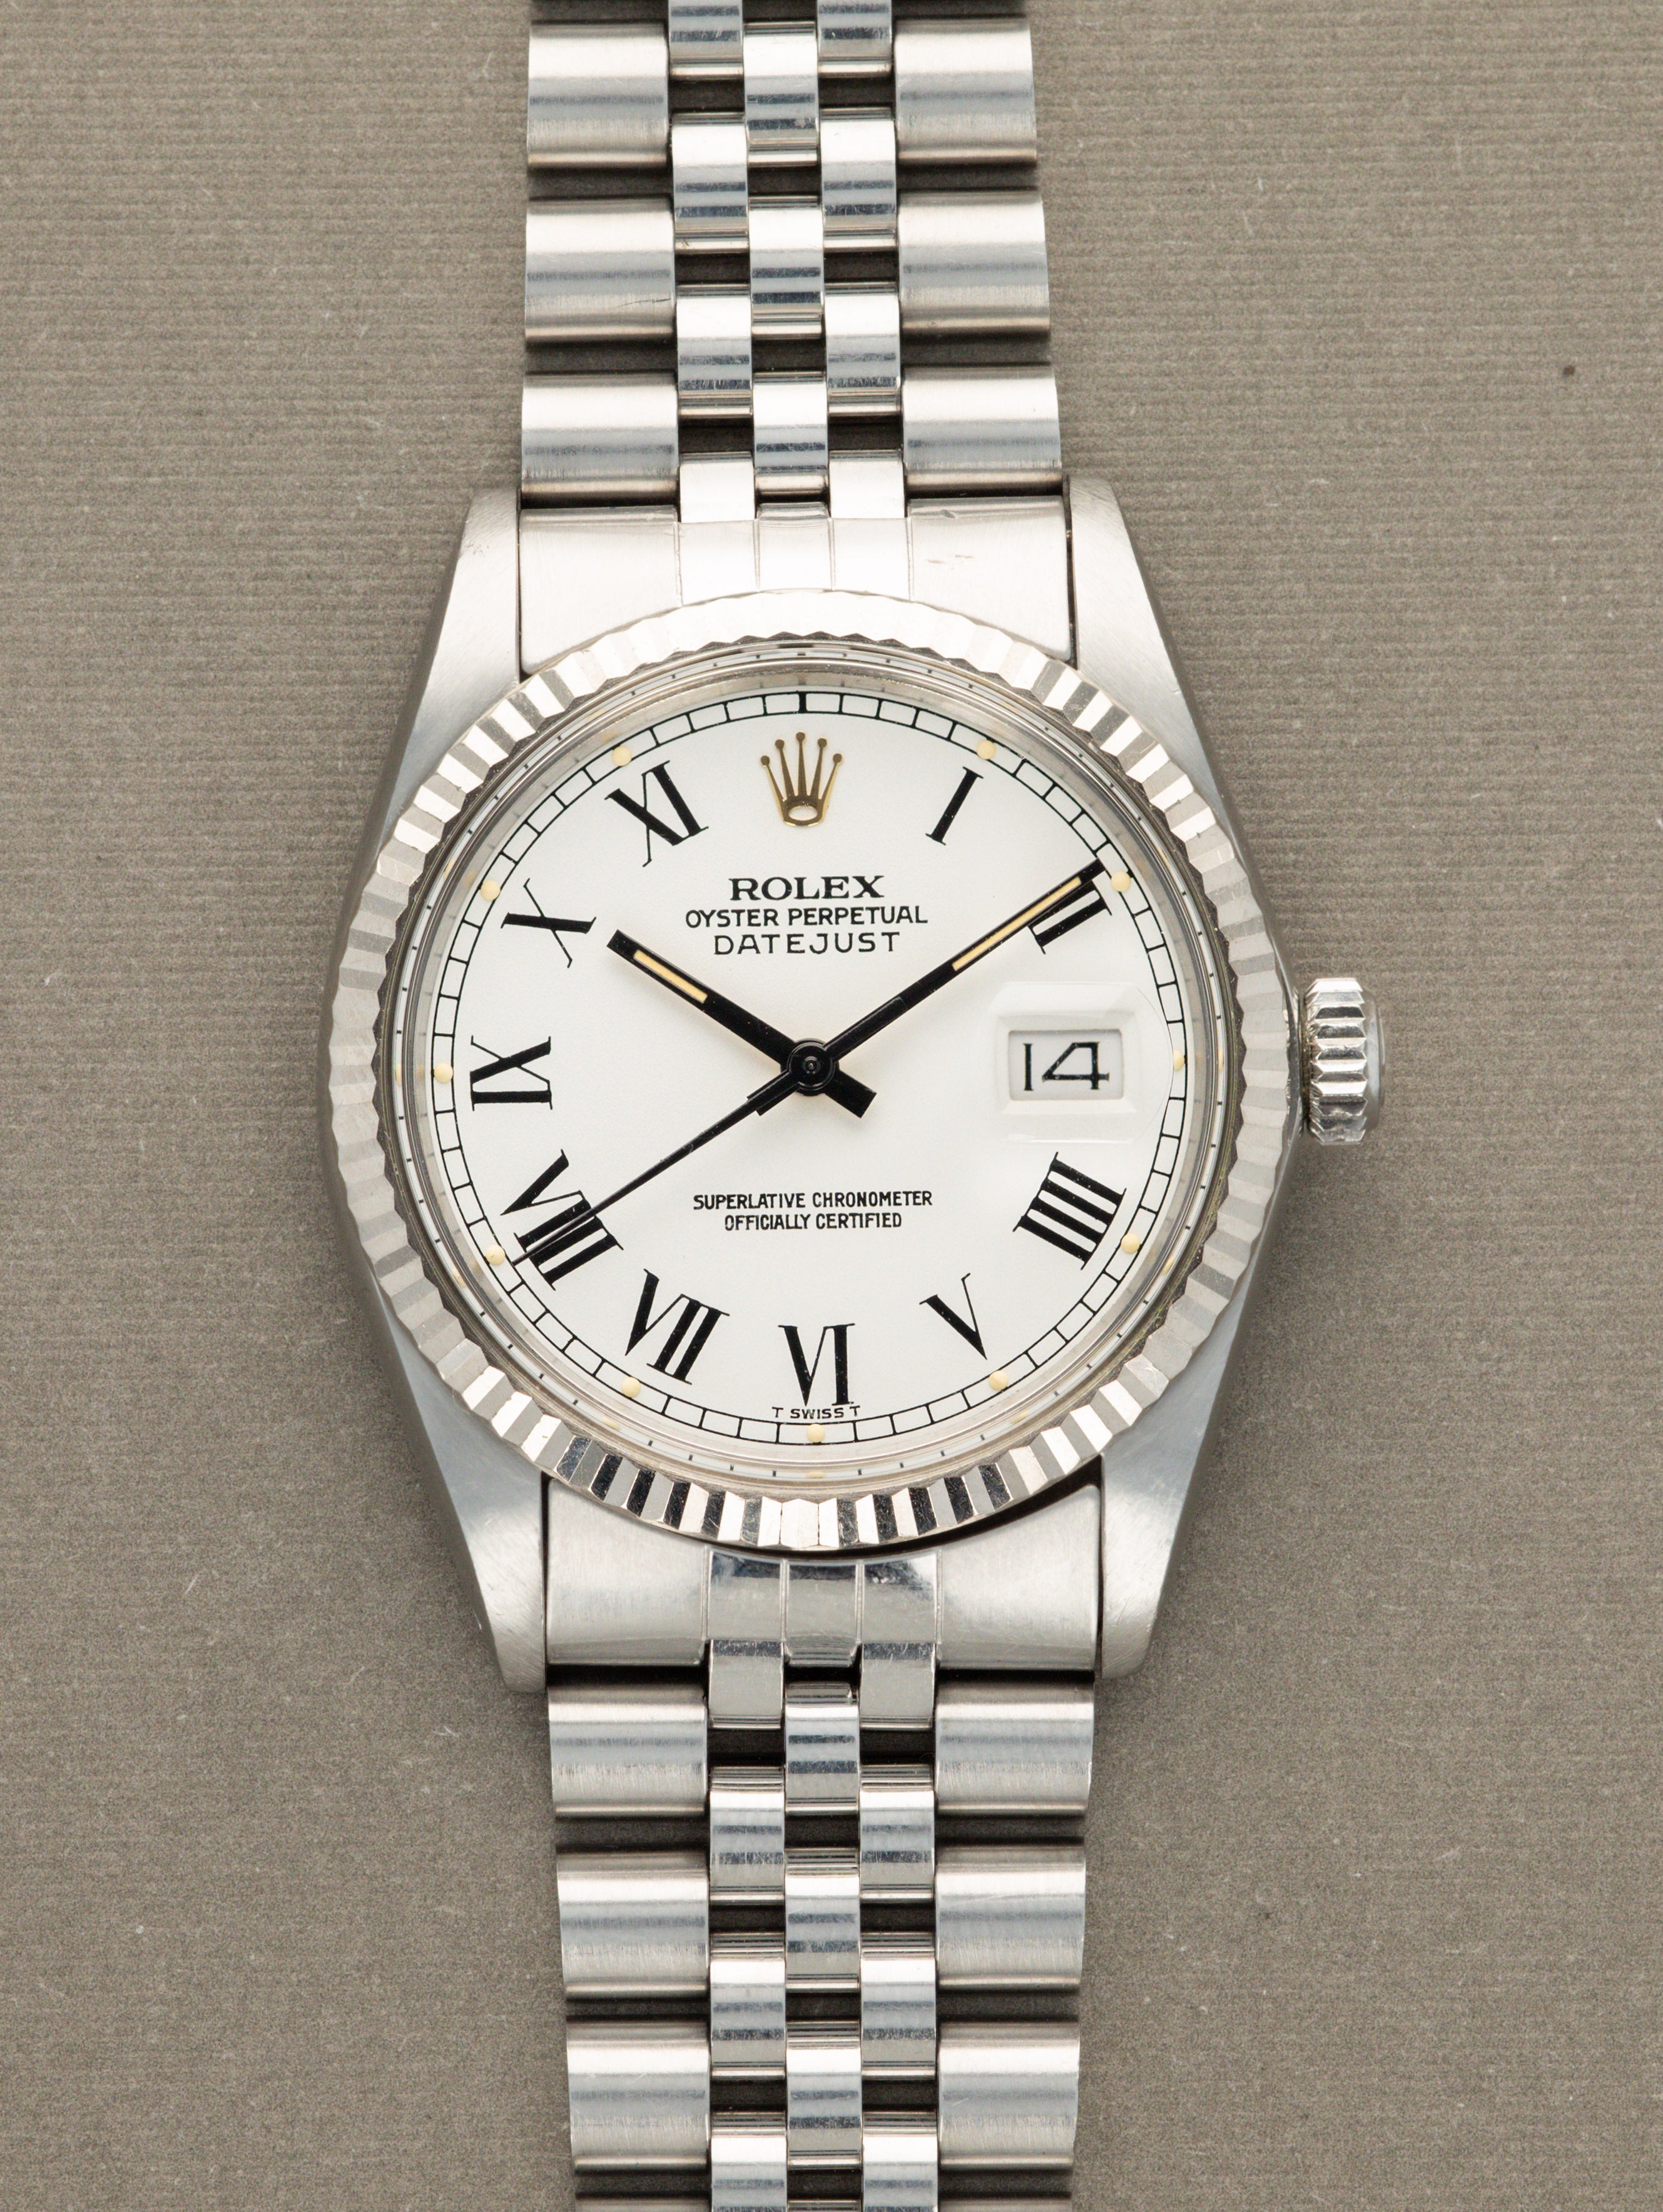 Rolex Datejust Ref. 16014 - 'Buckley' Dial Unpolished